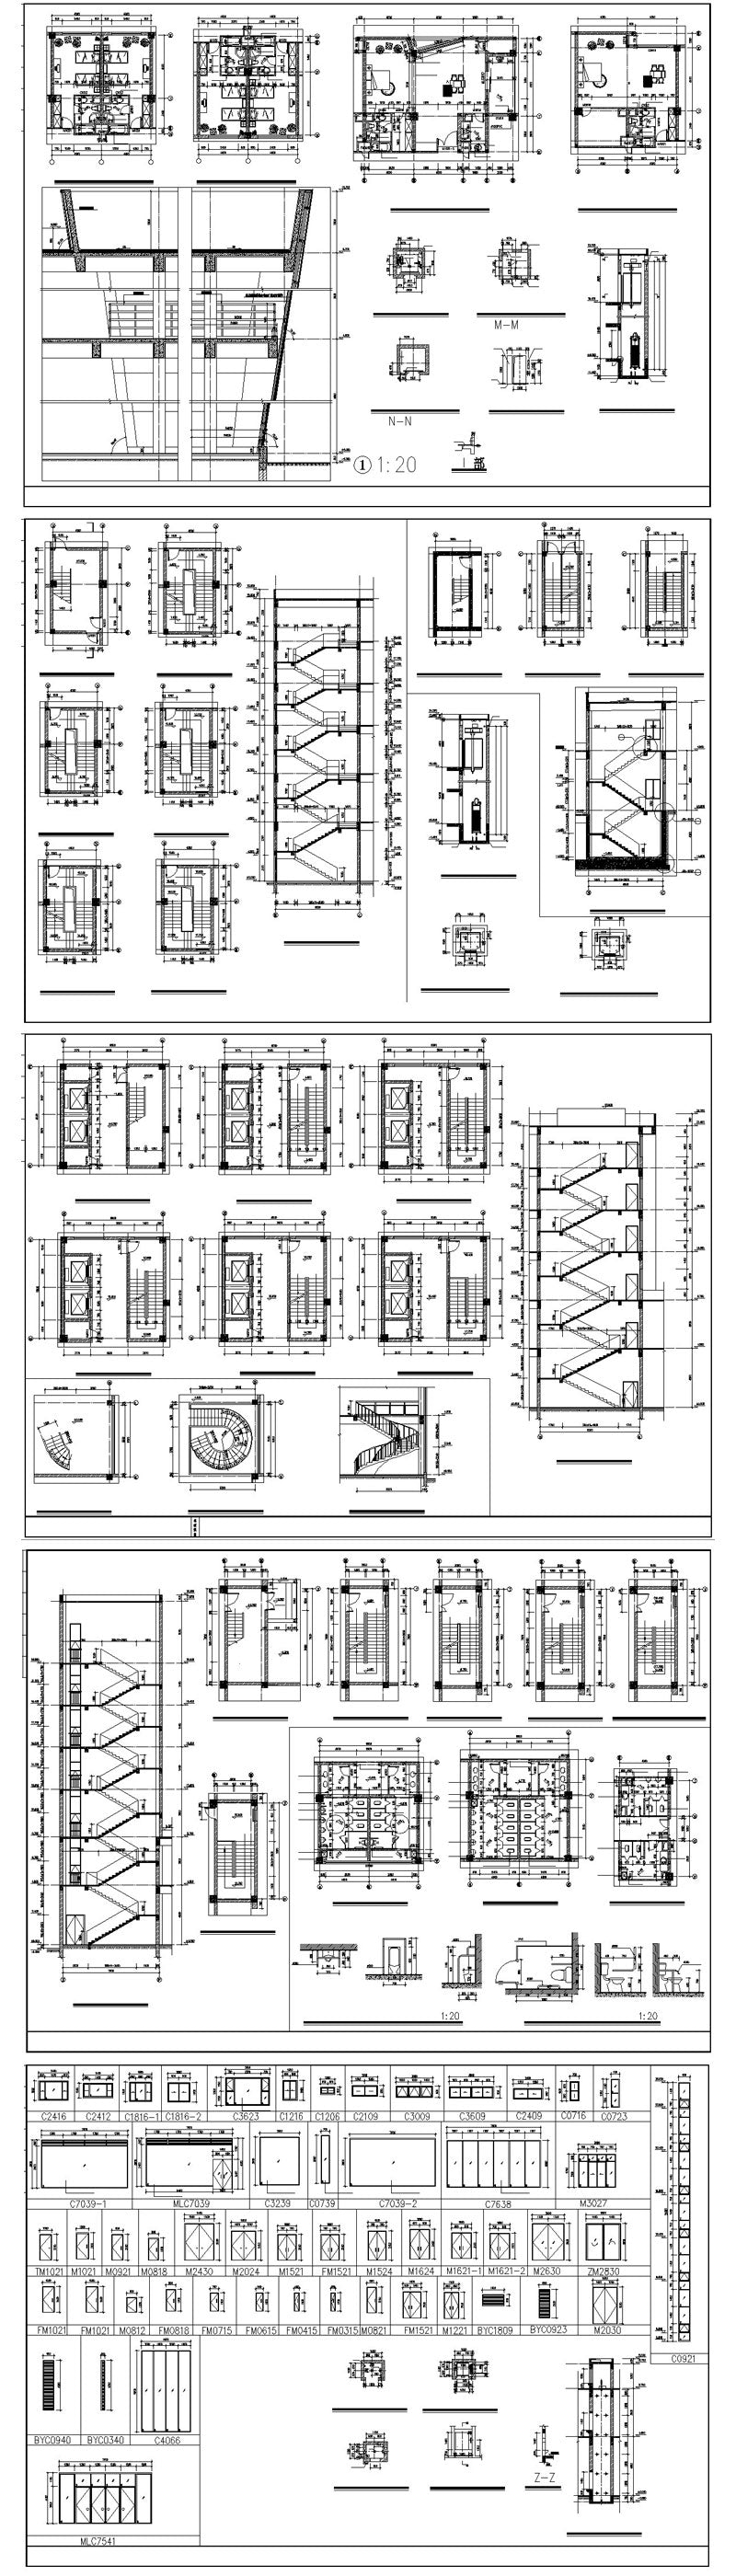 ★【Residential Building CAD Design Collection V.2】Layout,Lobby,Room design,Public facilities,Counter@Autocad Blocks,Drawings,CAD Details,Elevation